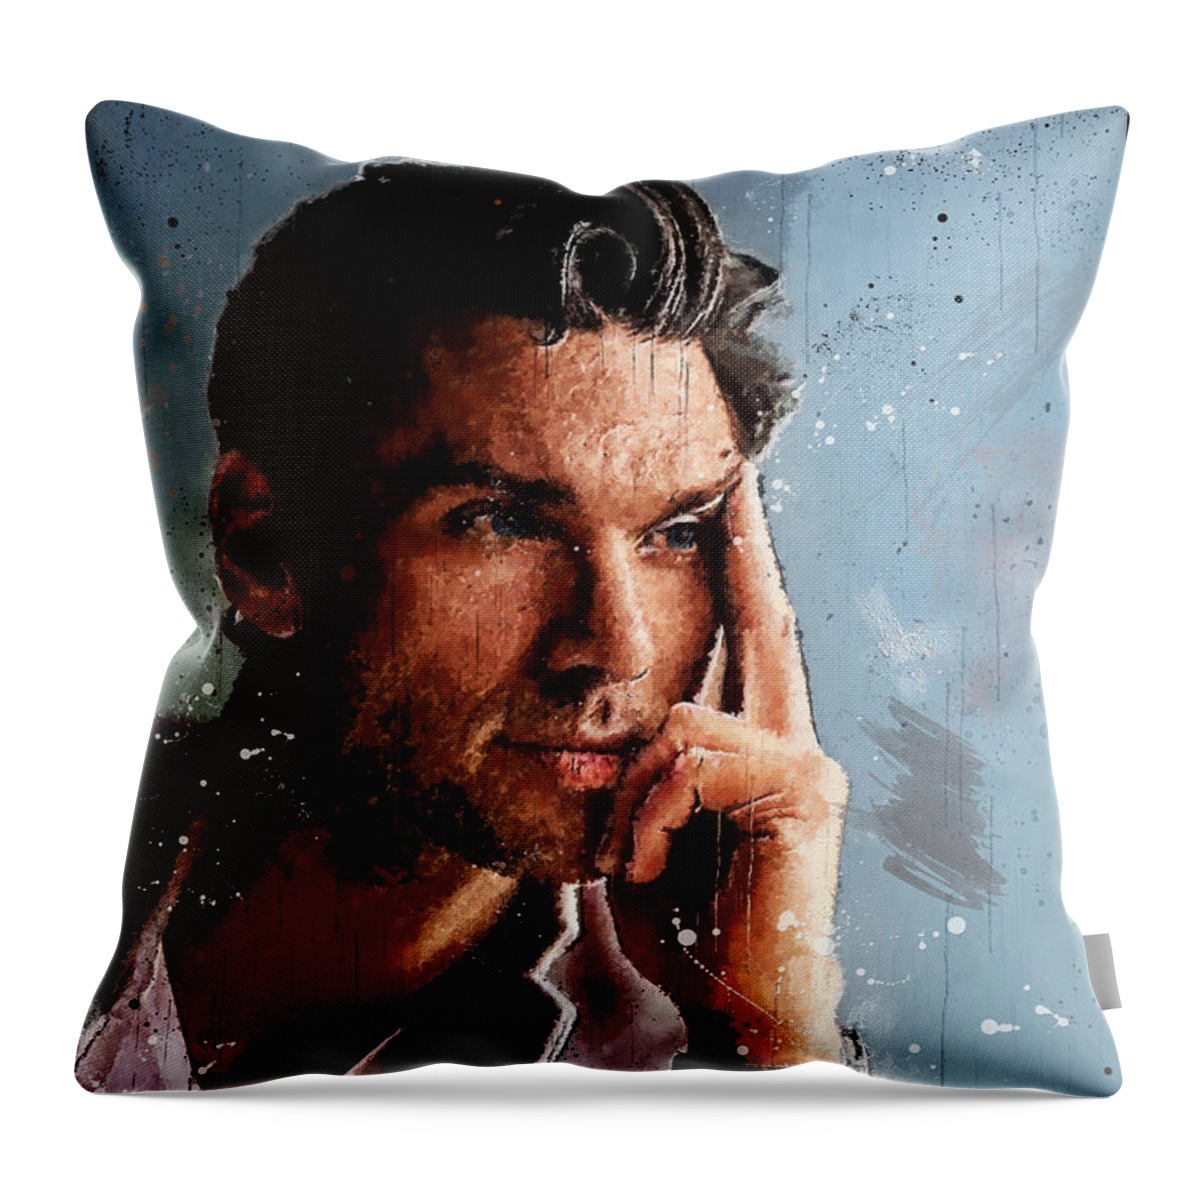 Kevin Mcgarry Throw Pillow featuring the painting Kevin McGarry - Portrait II by Jordan Blackstone